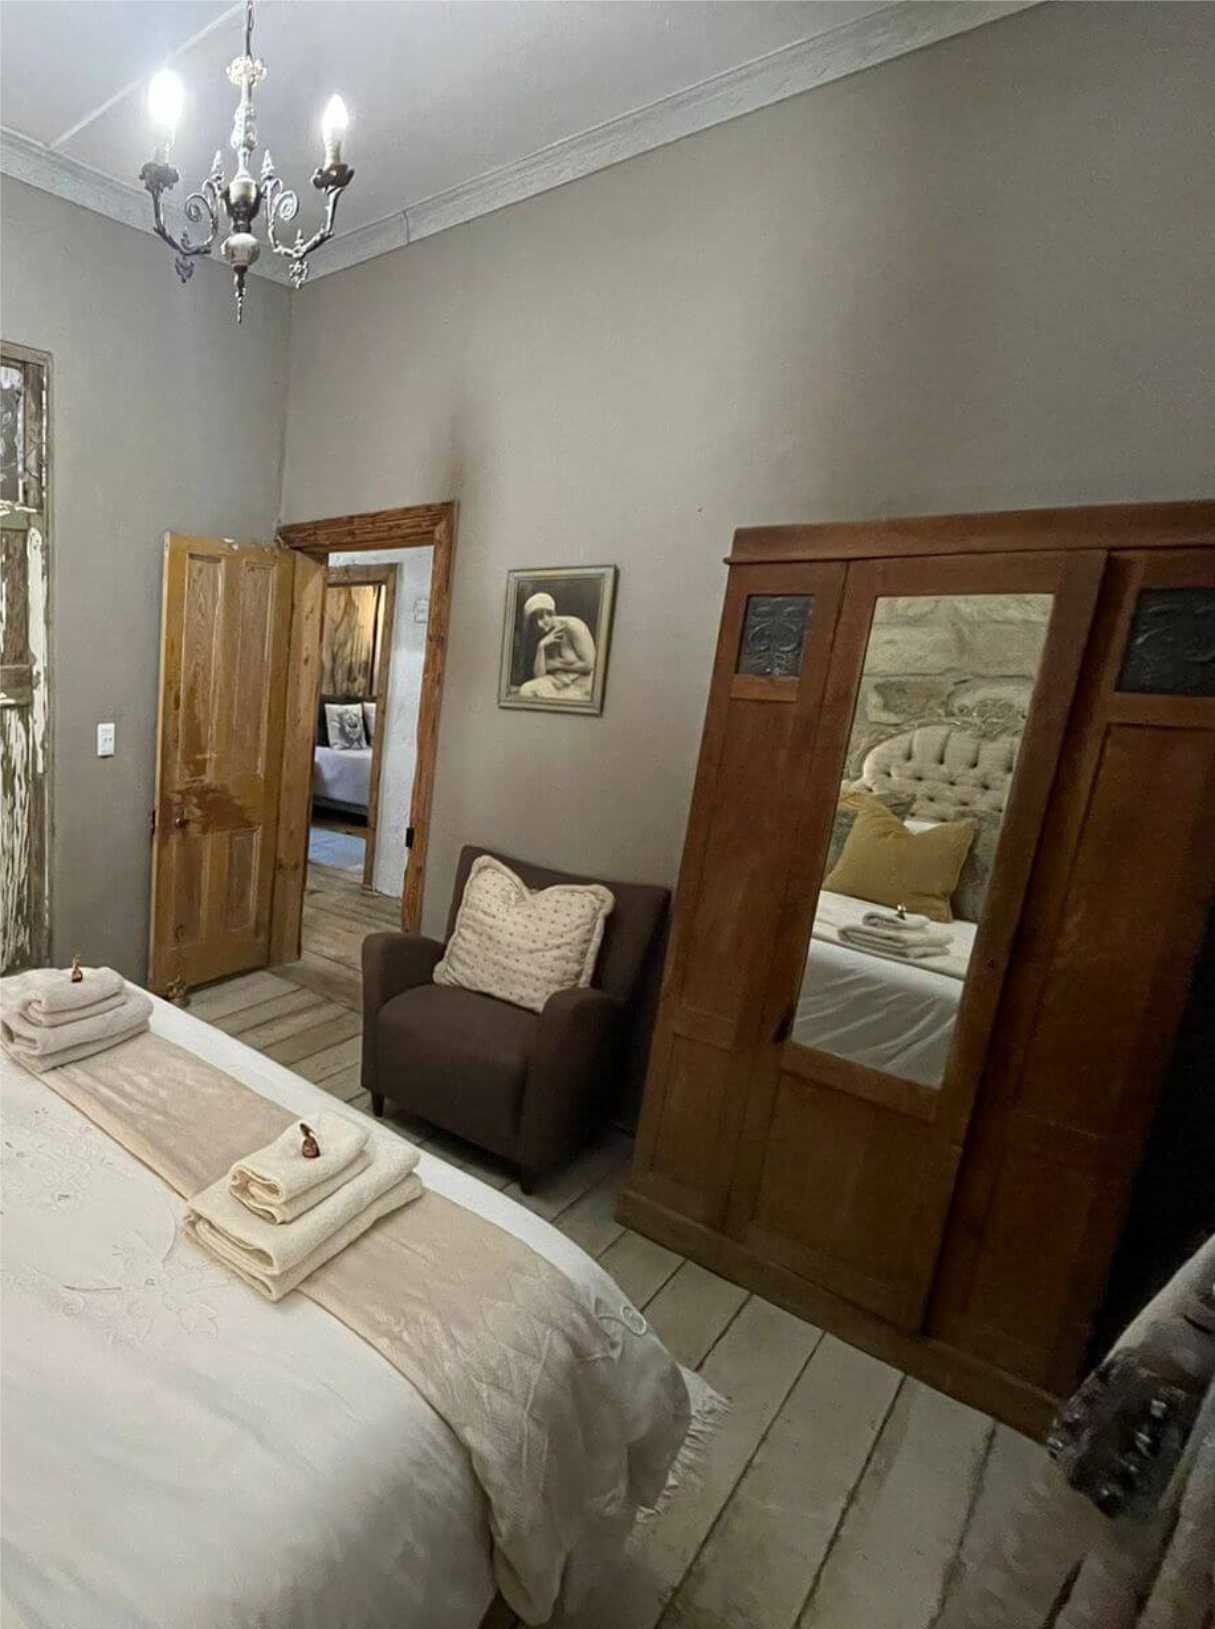 XoXo Suite at Love Story Guest House, Paul Roux, Free State, South Africa